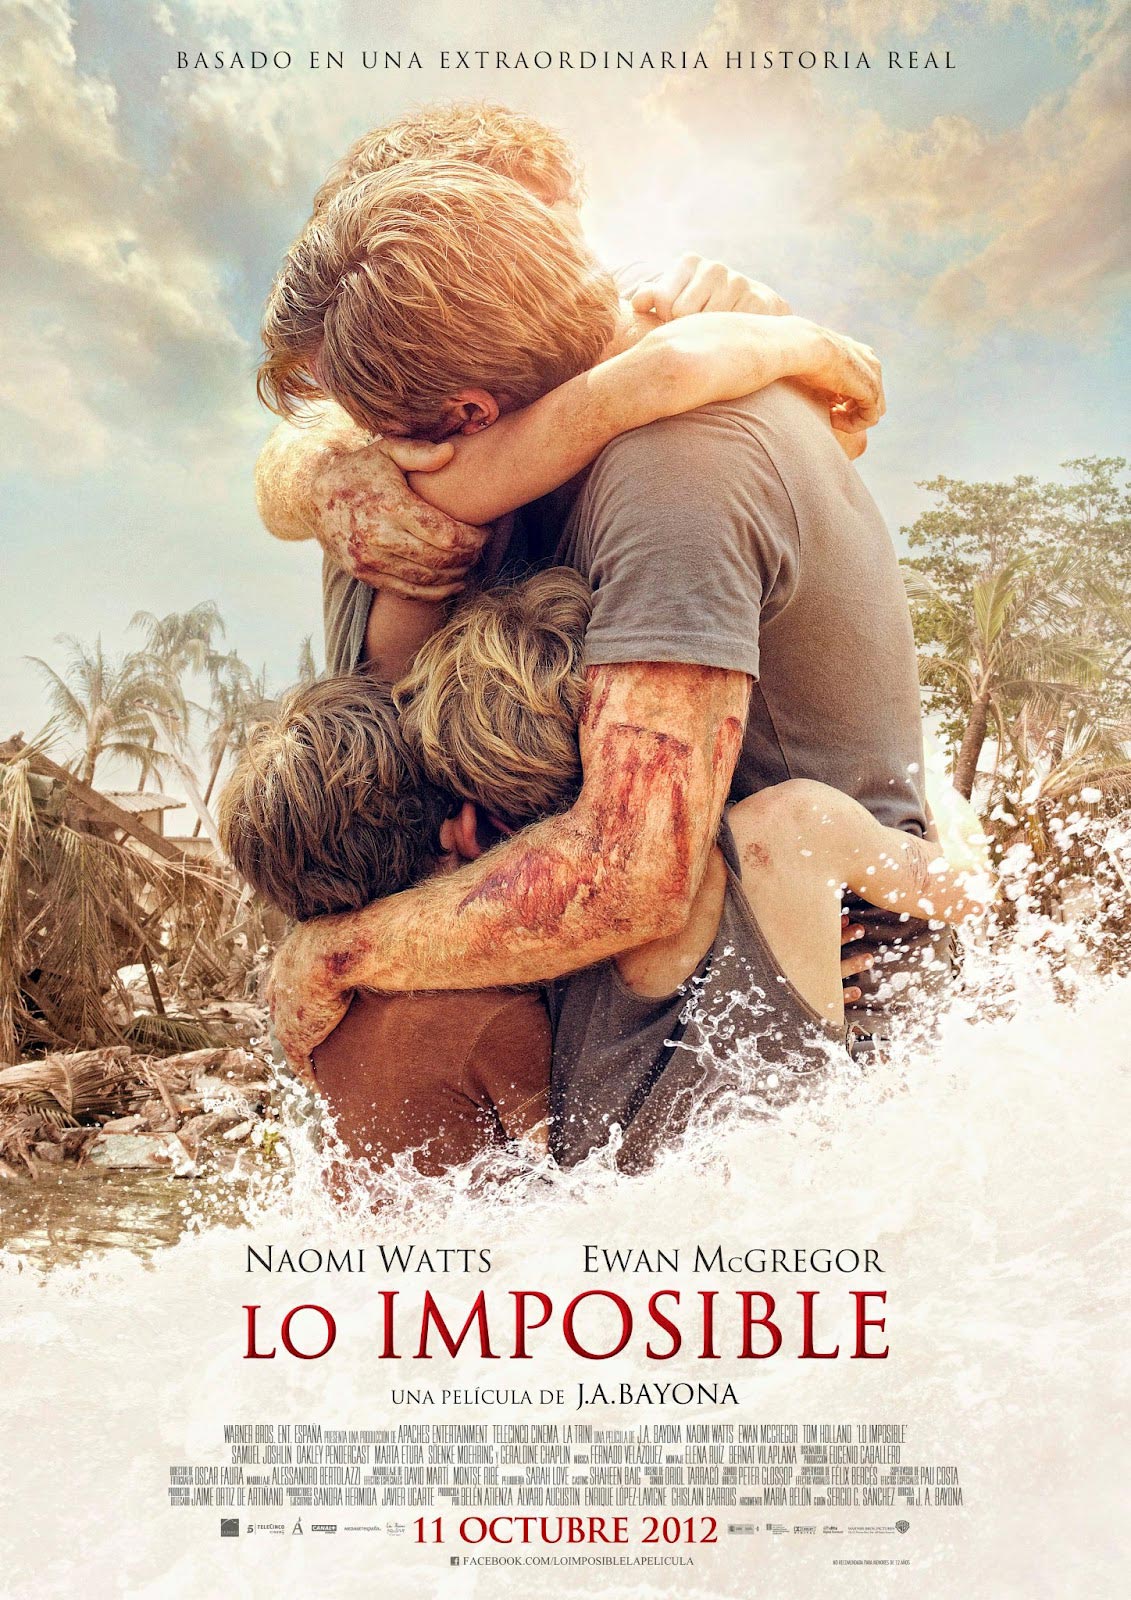 The Impossible Poster